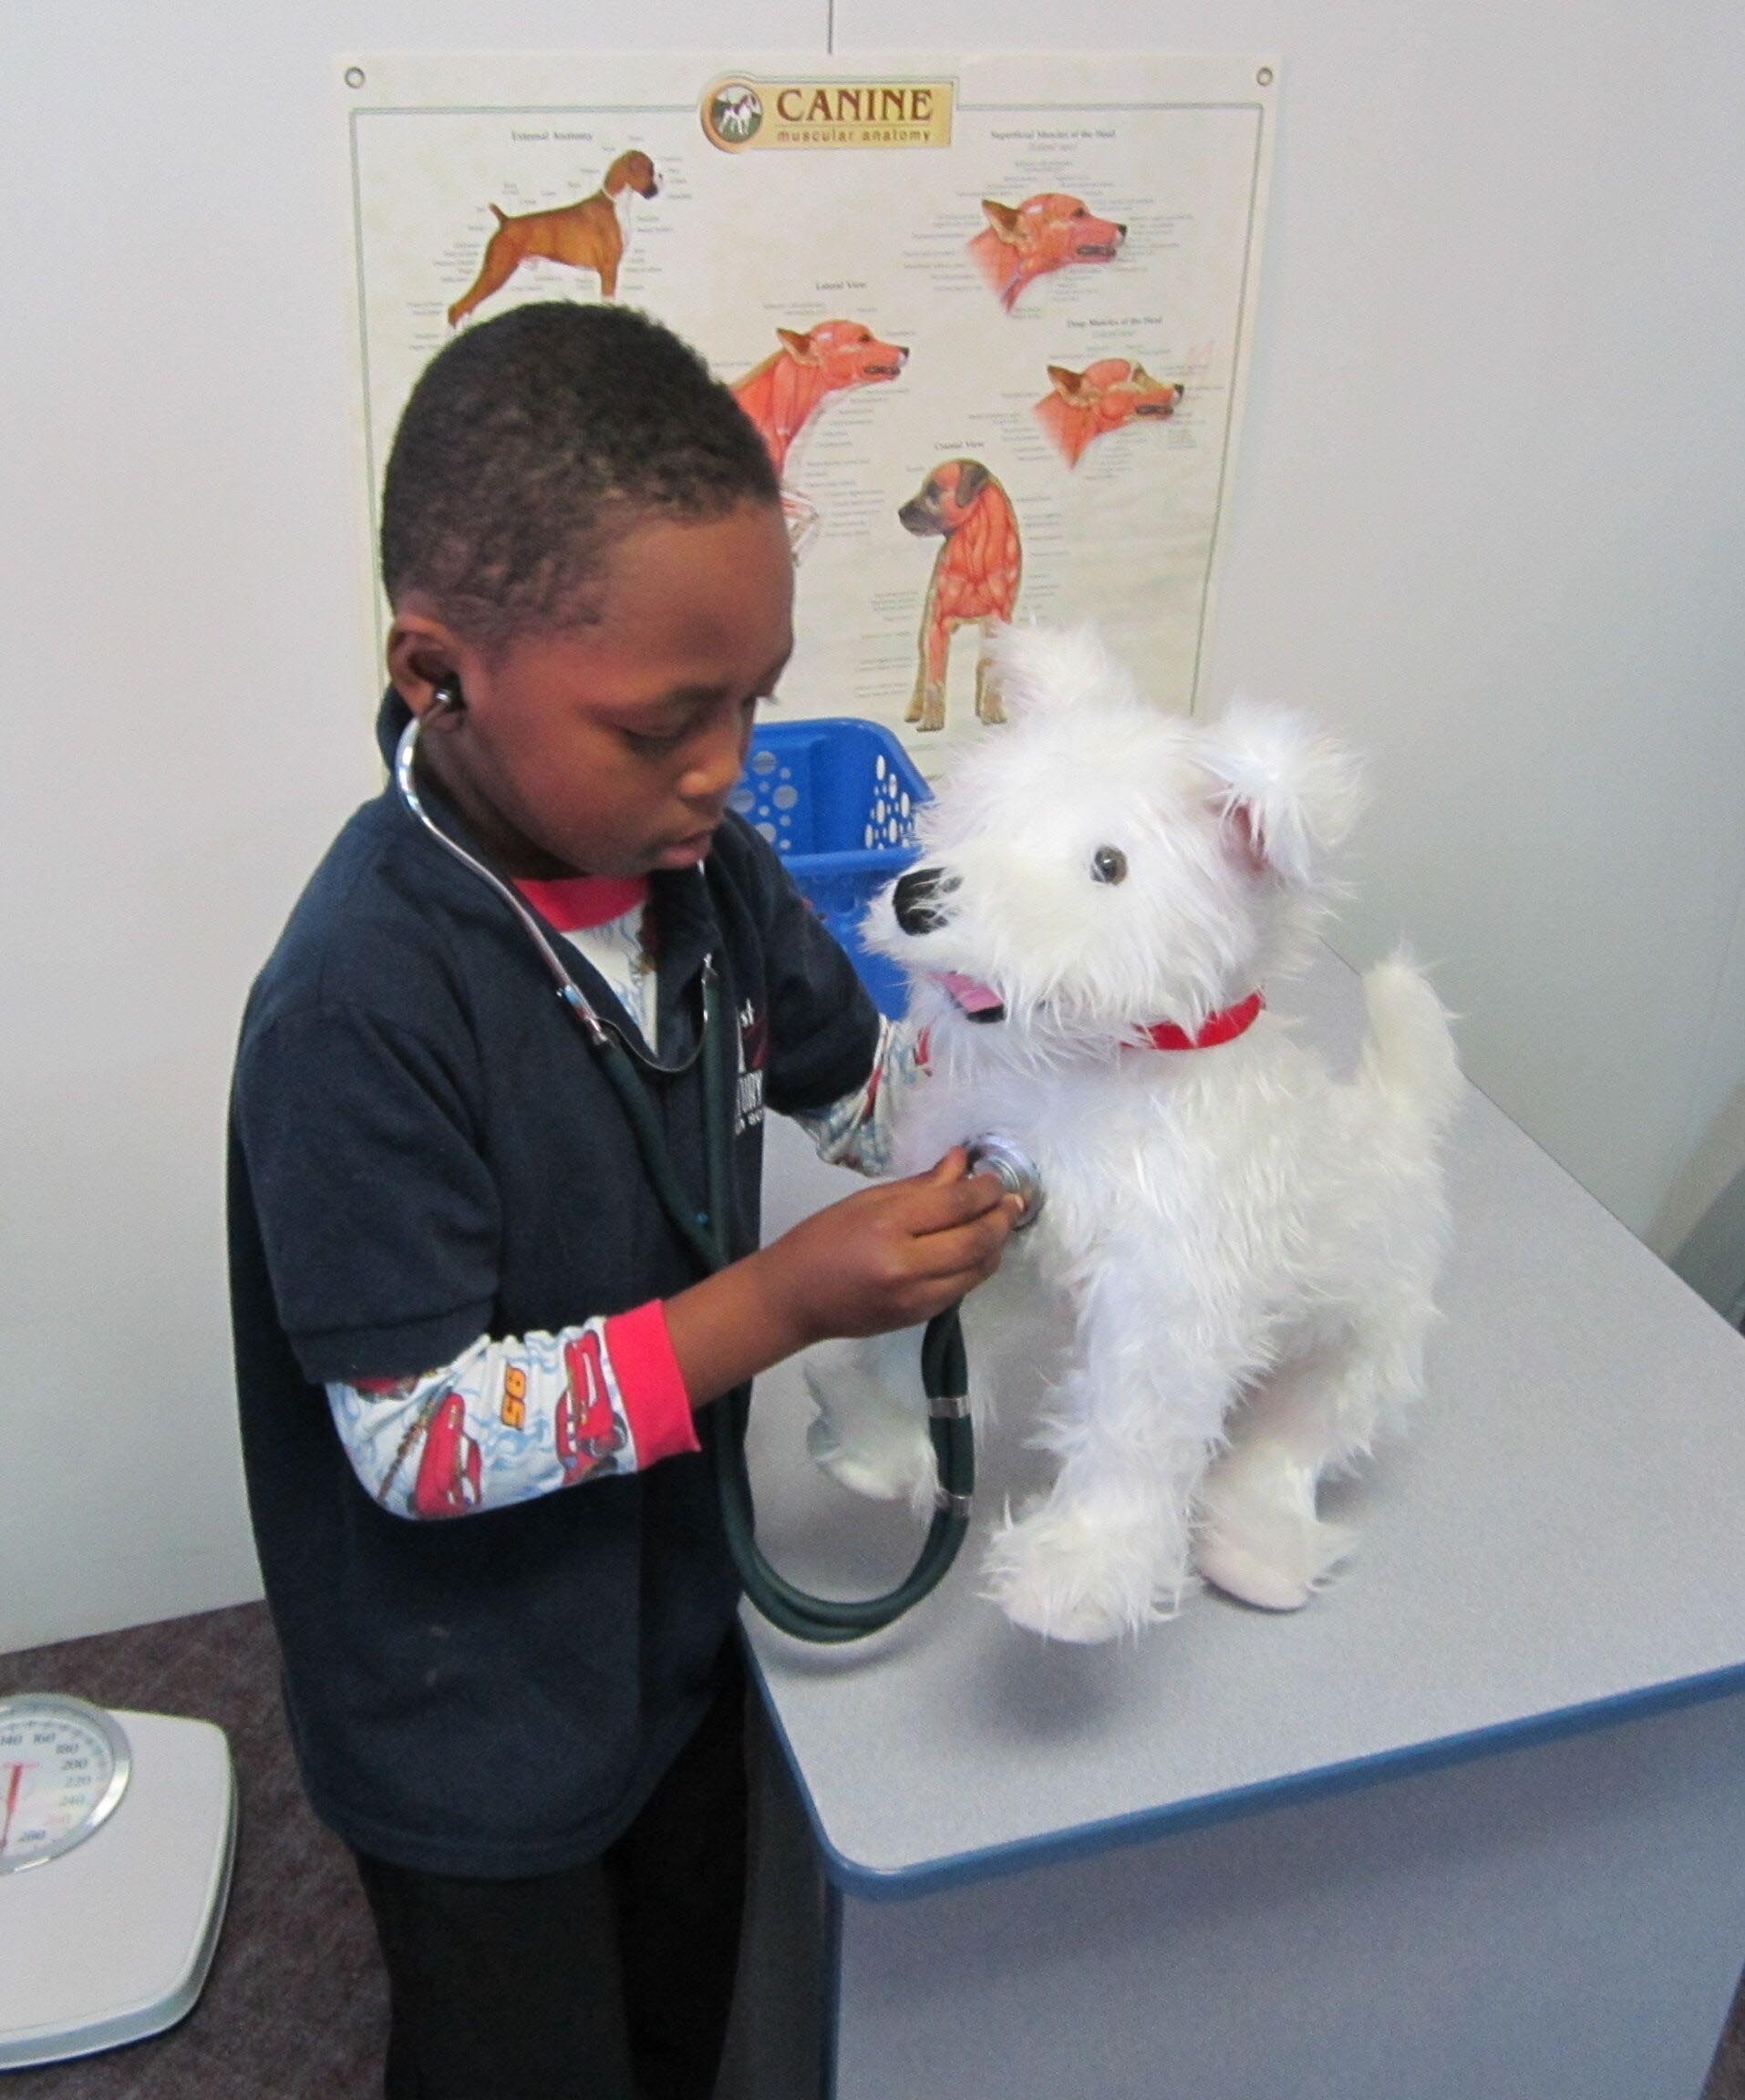 Child playing vet: Exhibit at the Curious Kids' Museum & Discovery Zone